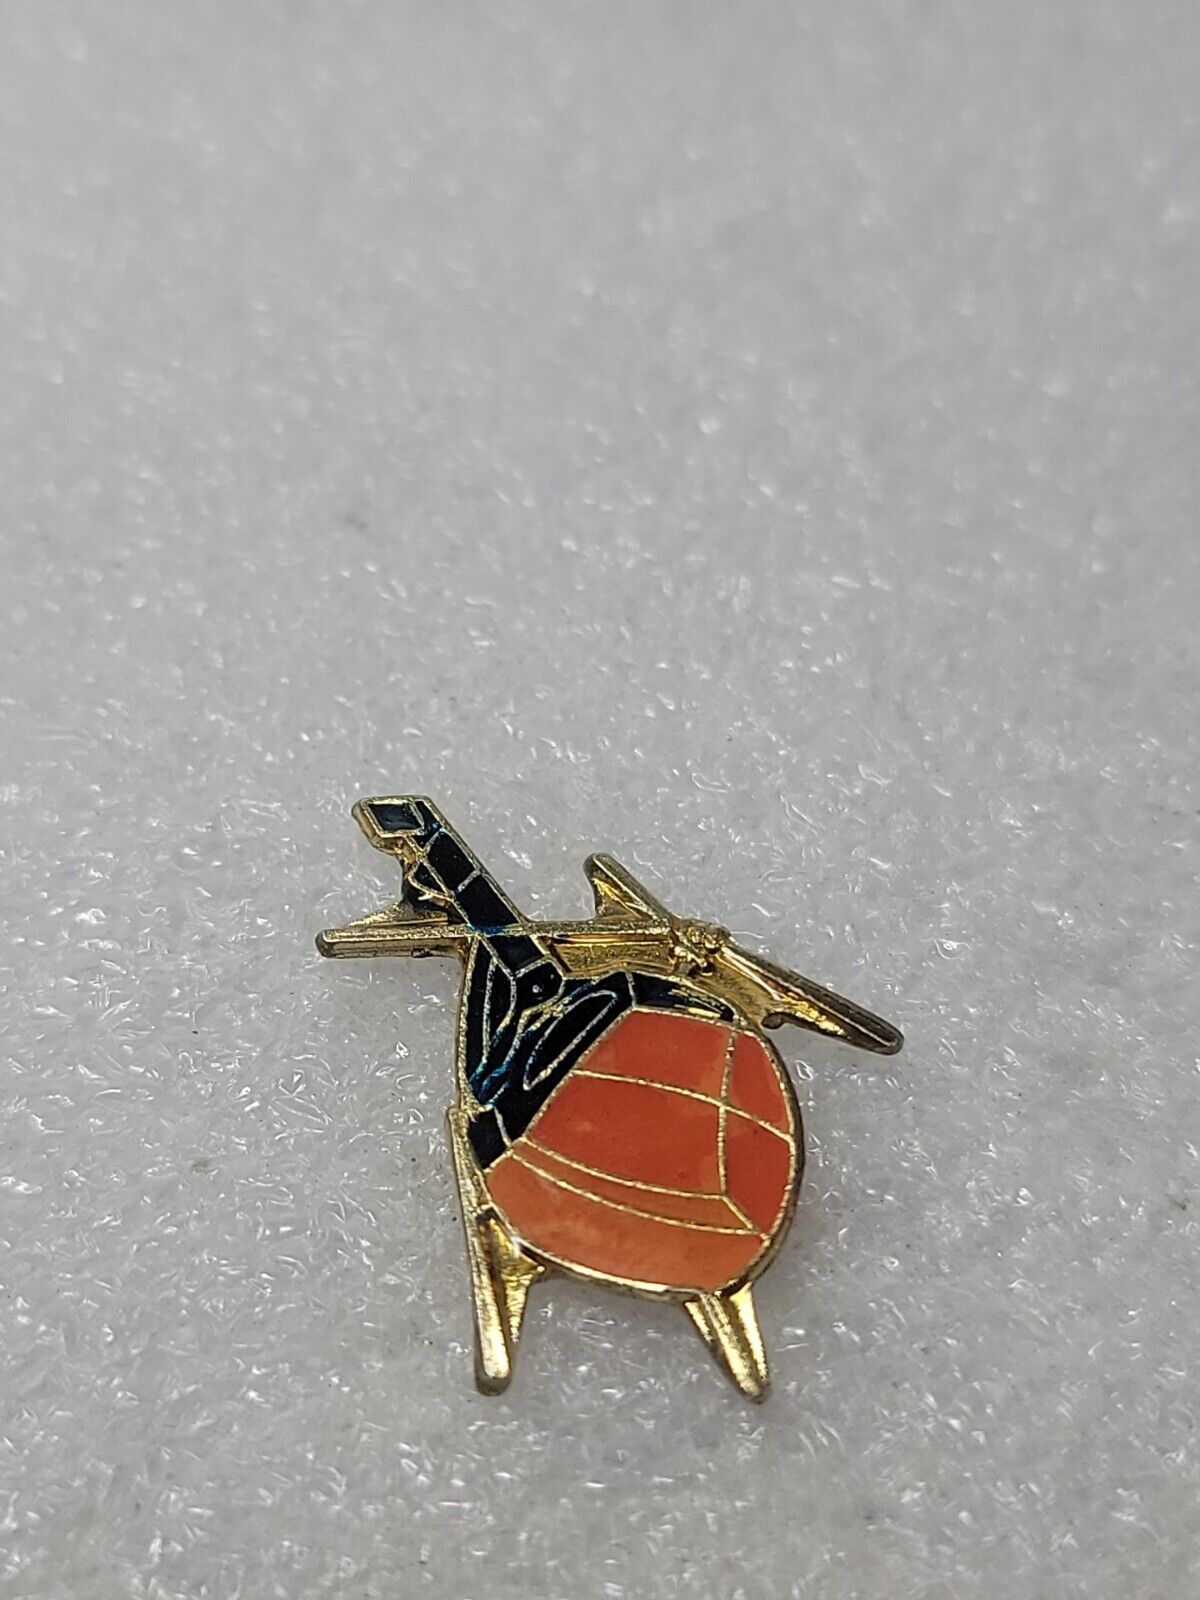 Osage Hughes TH-55A Helicopter Trainer Vintage Enamel Lapel Pin Clutch Back